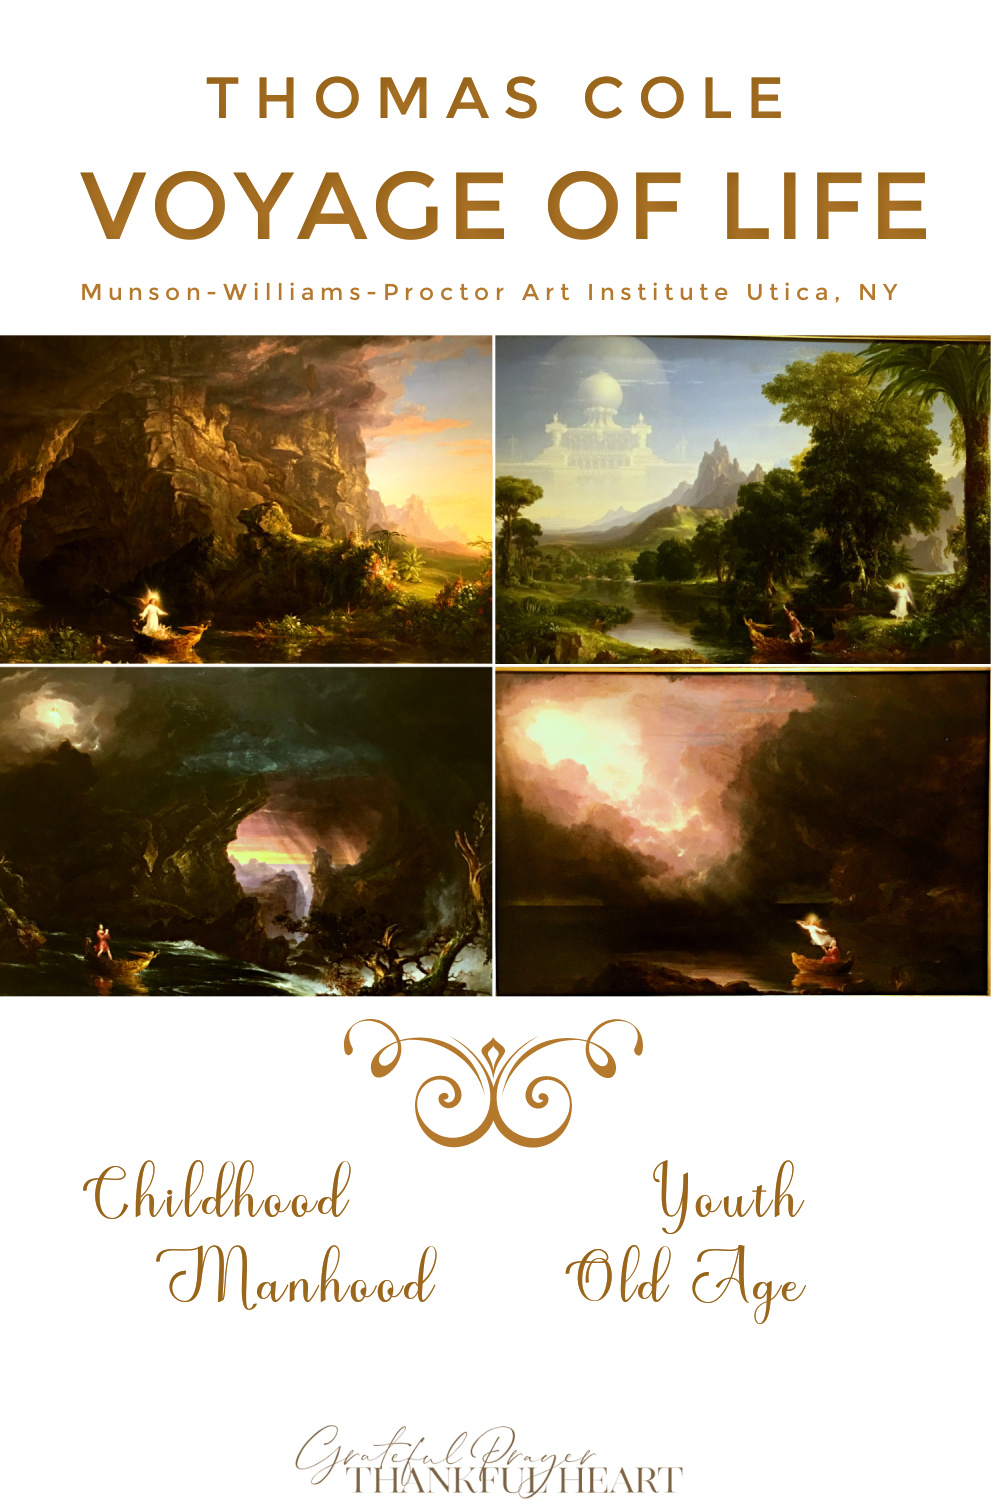 Thomas Cole Voyage of Life series of paintings Munson art institute 